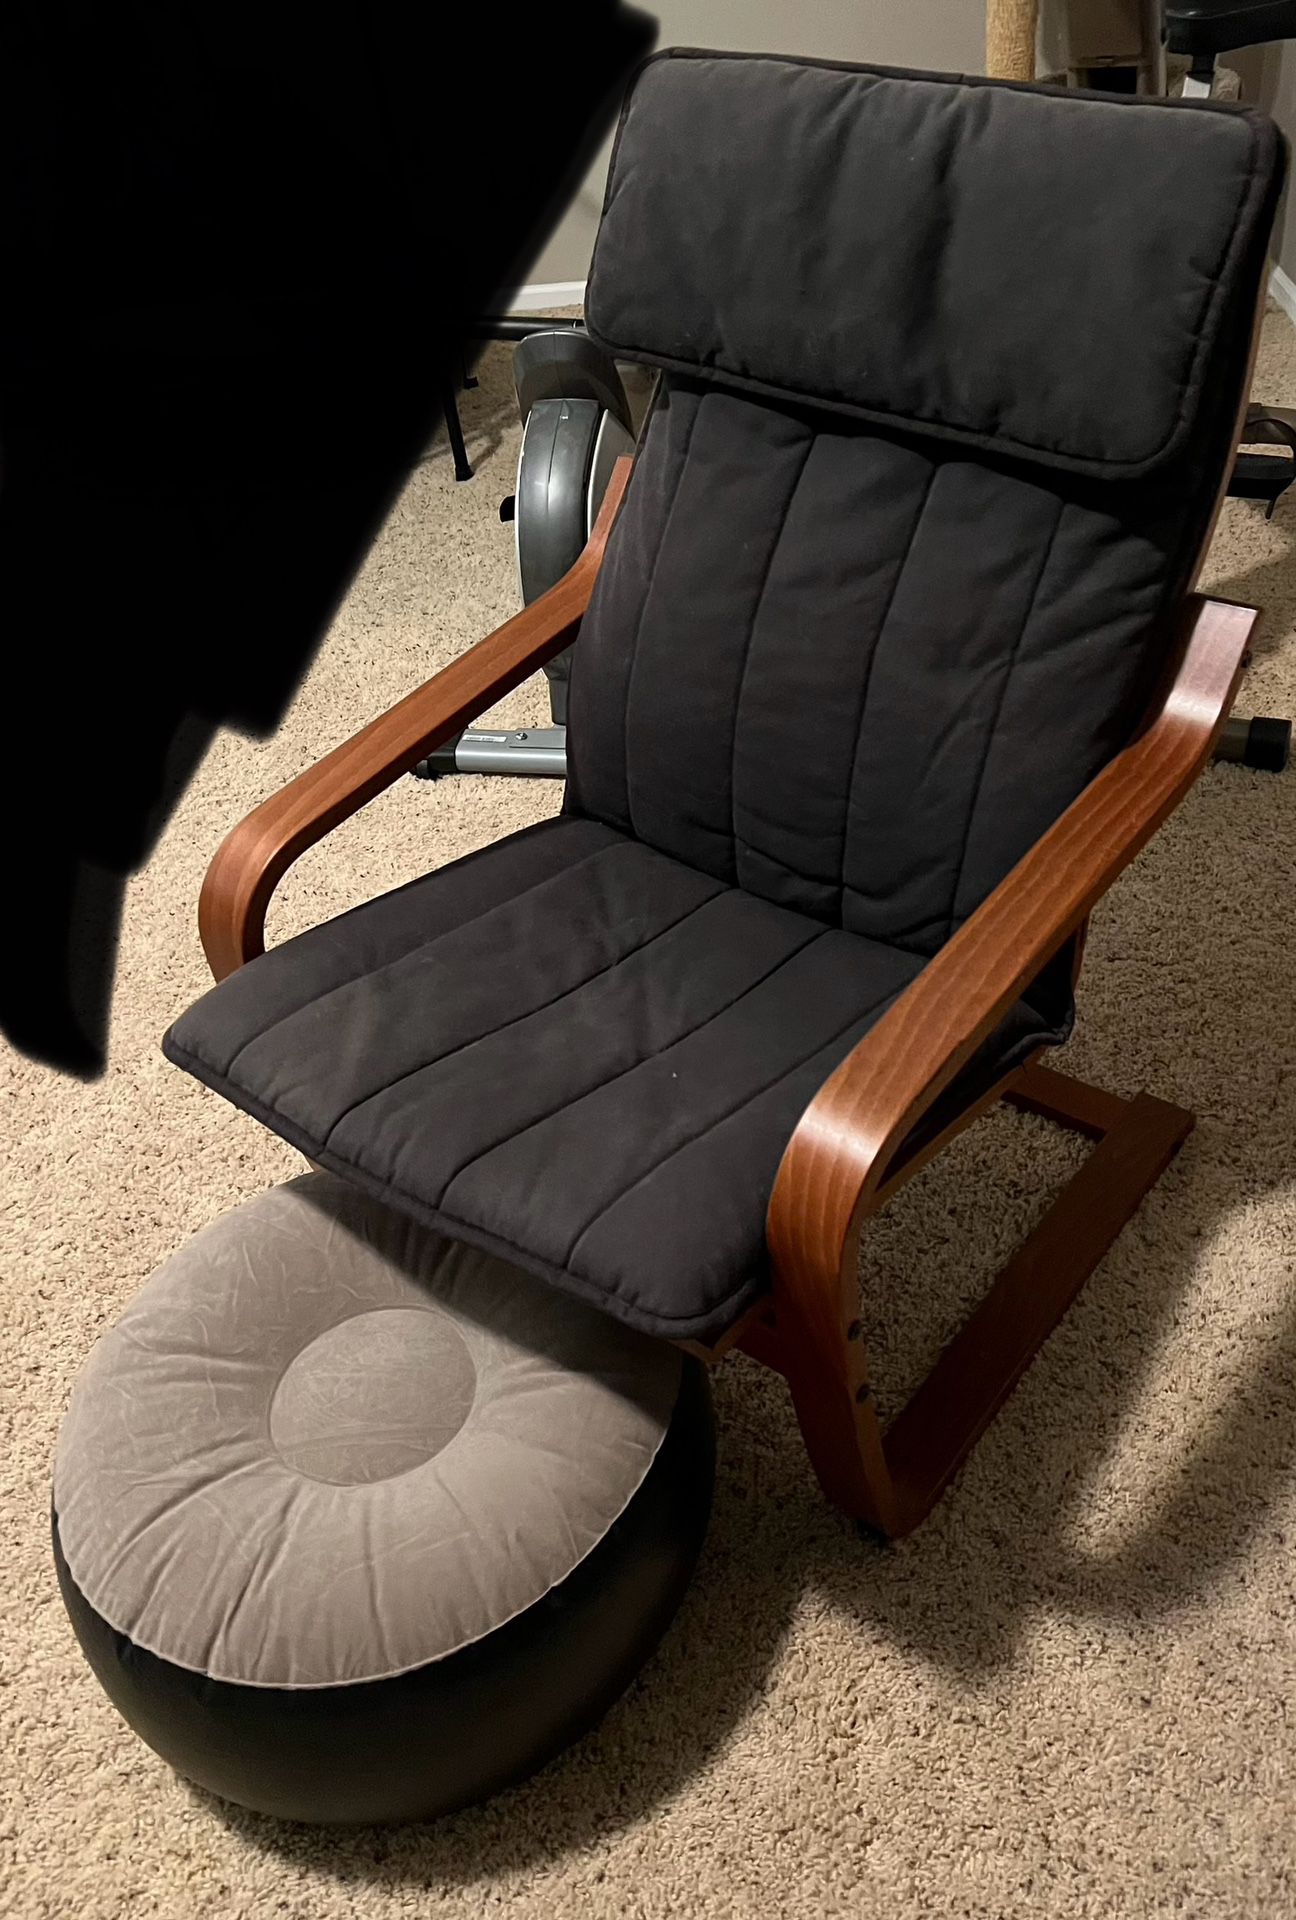 IKEA Chair And A Ottoman 